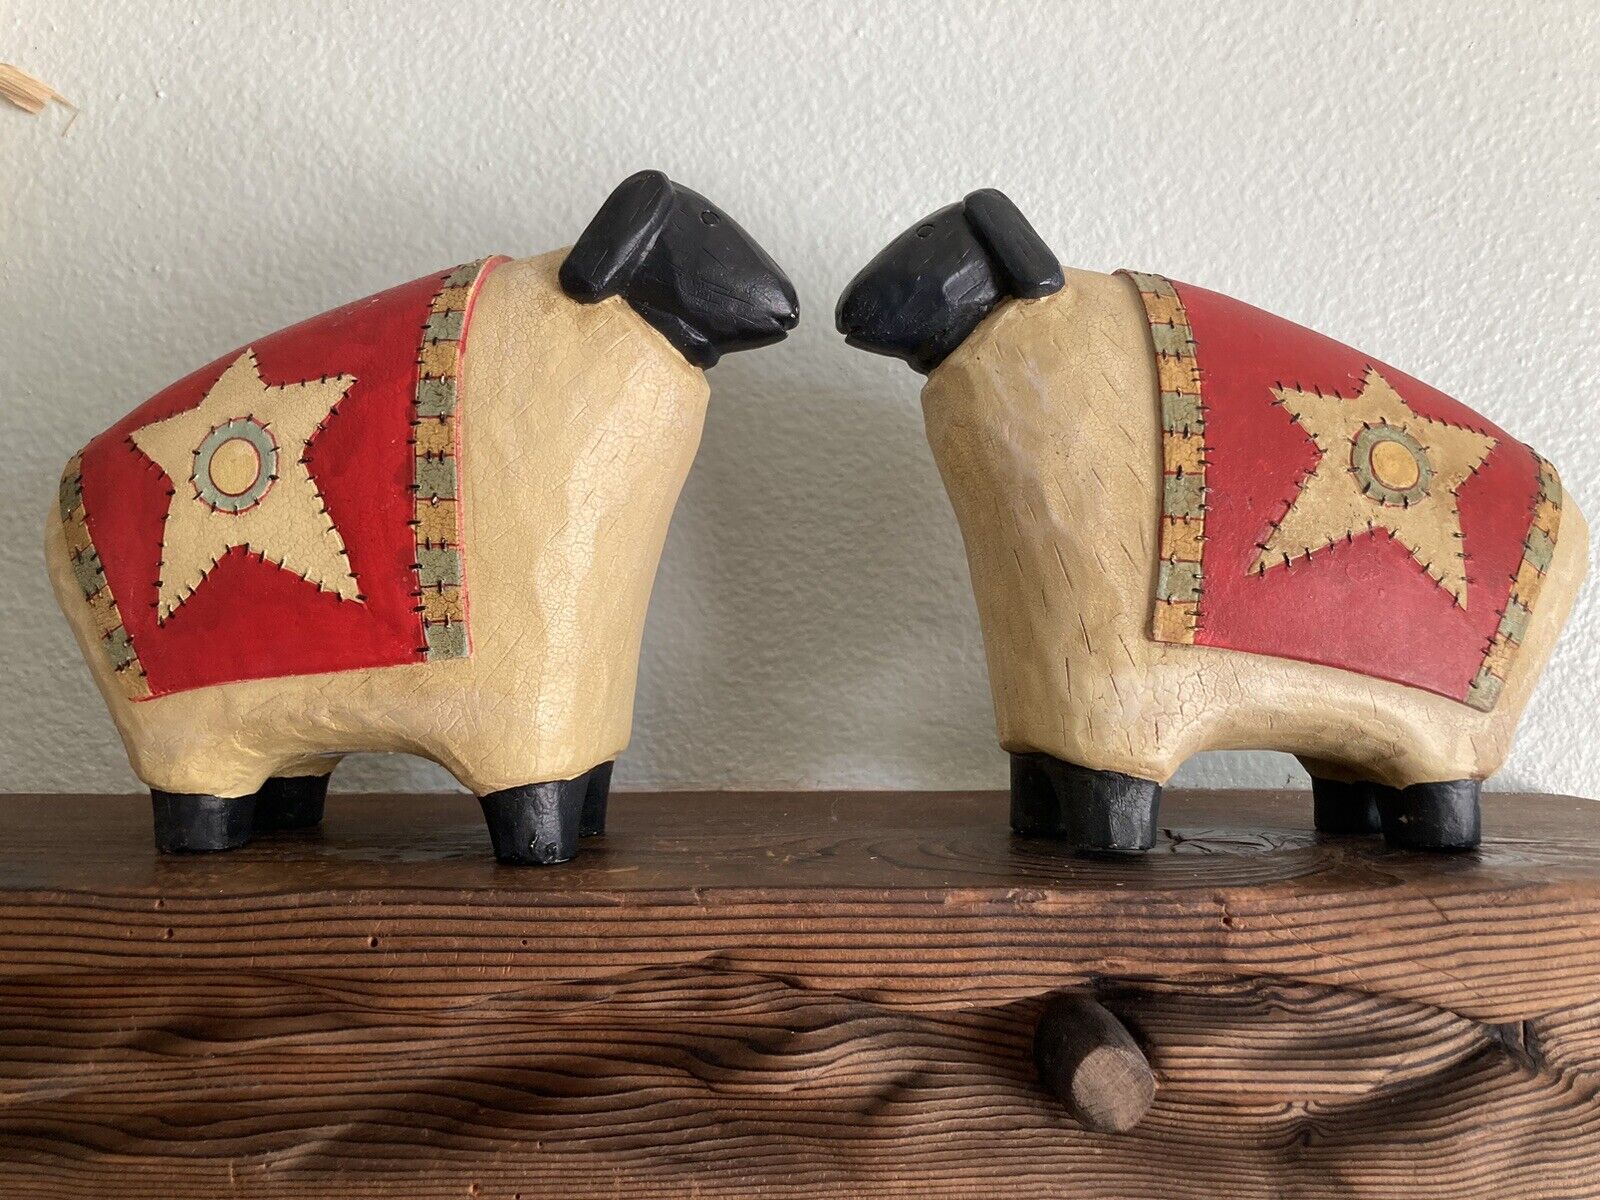 Set of 2 Country Side Black Sheep Figures Classic for Farm or Ranch Folk Art